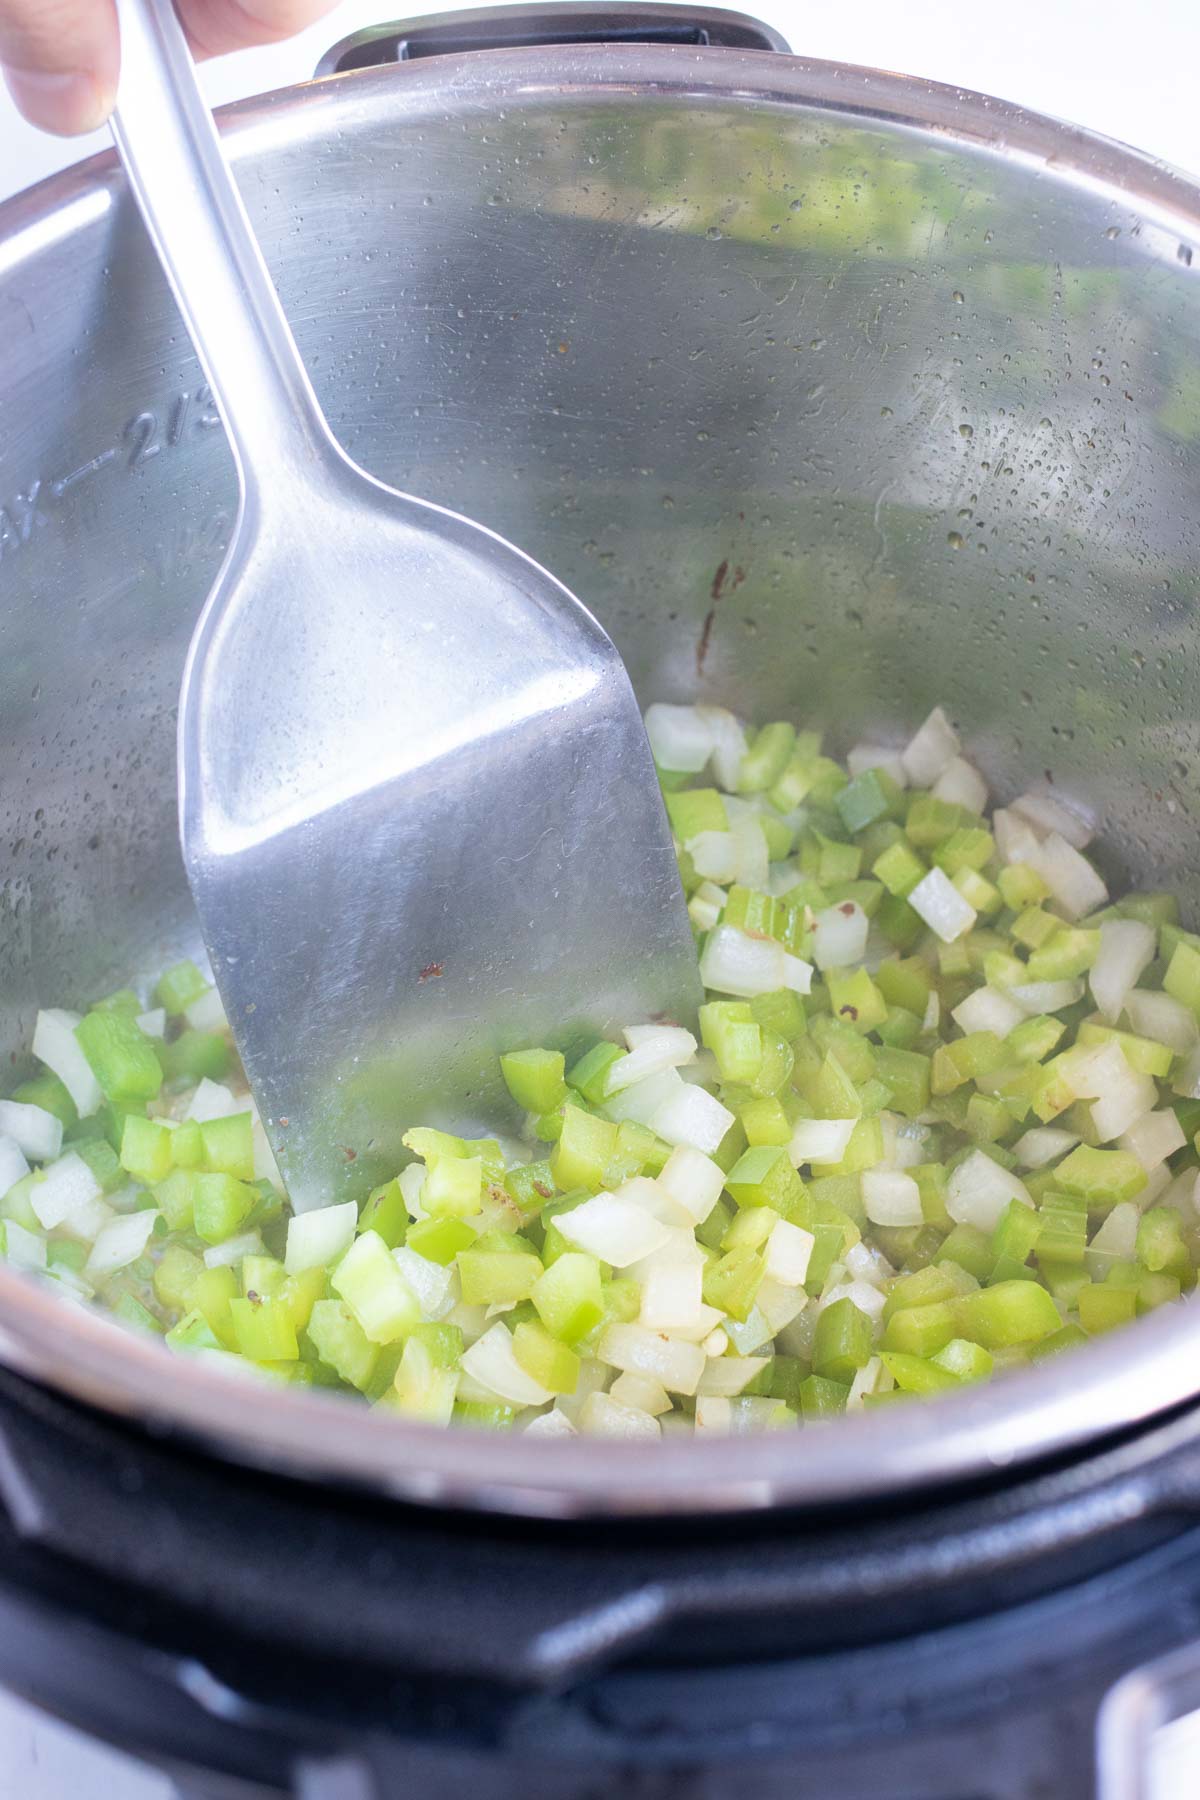 Diced onions, peppers, and celery are sautéd in the pressure cooker.